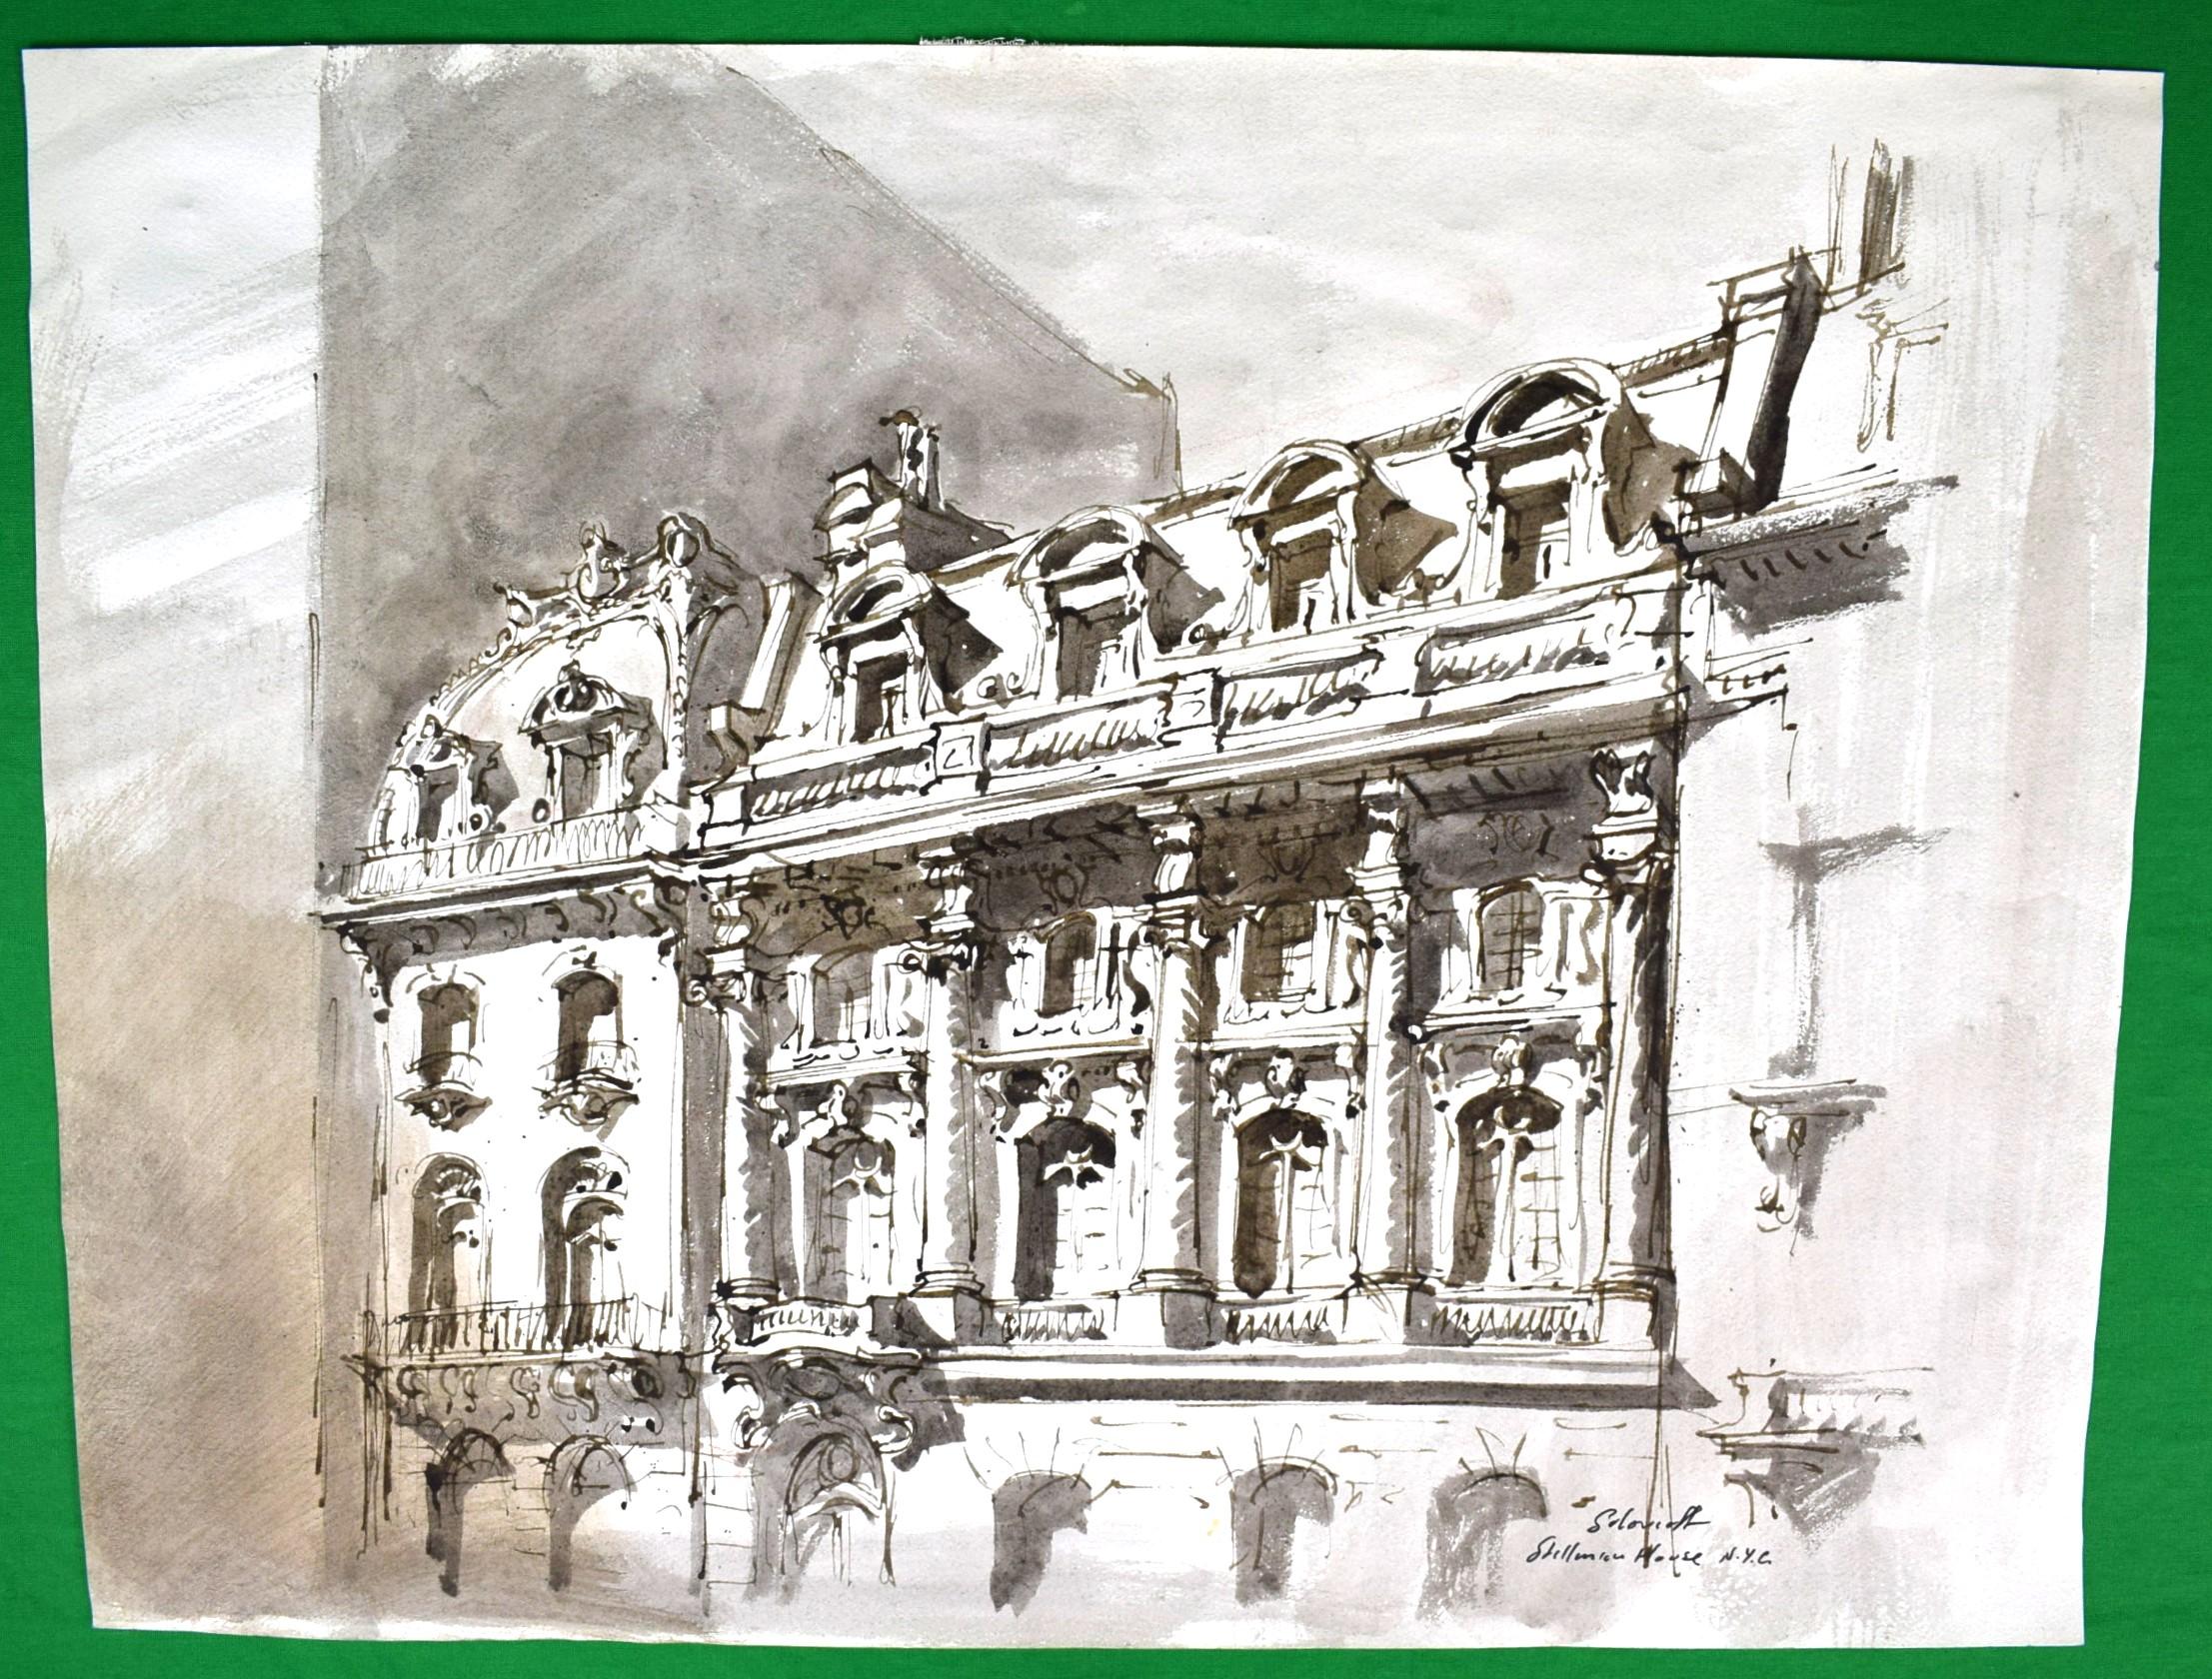 Sheet Sz: 15 1/2"H x 20 3/8"W

Both 72d Street mansions were built at about the turn of the century. The larger one, at No. 9, has been designated as a Landmark of New York by the Municipal Art Society, and a plaque on its facade bears the landmark